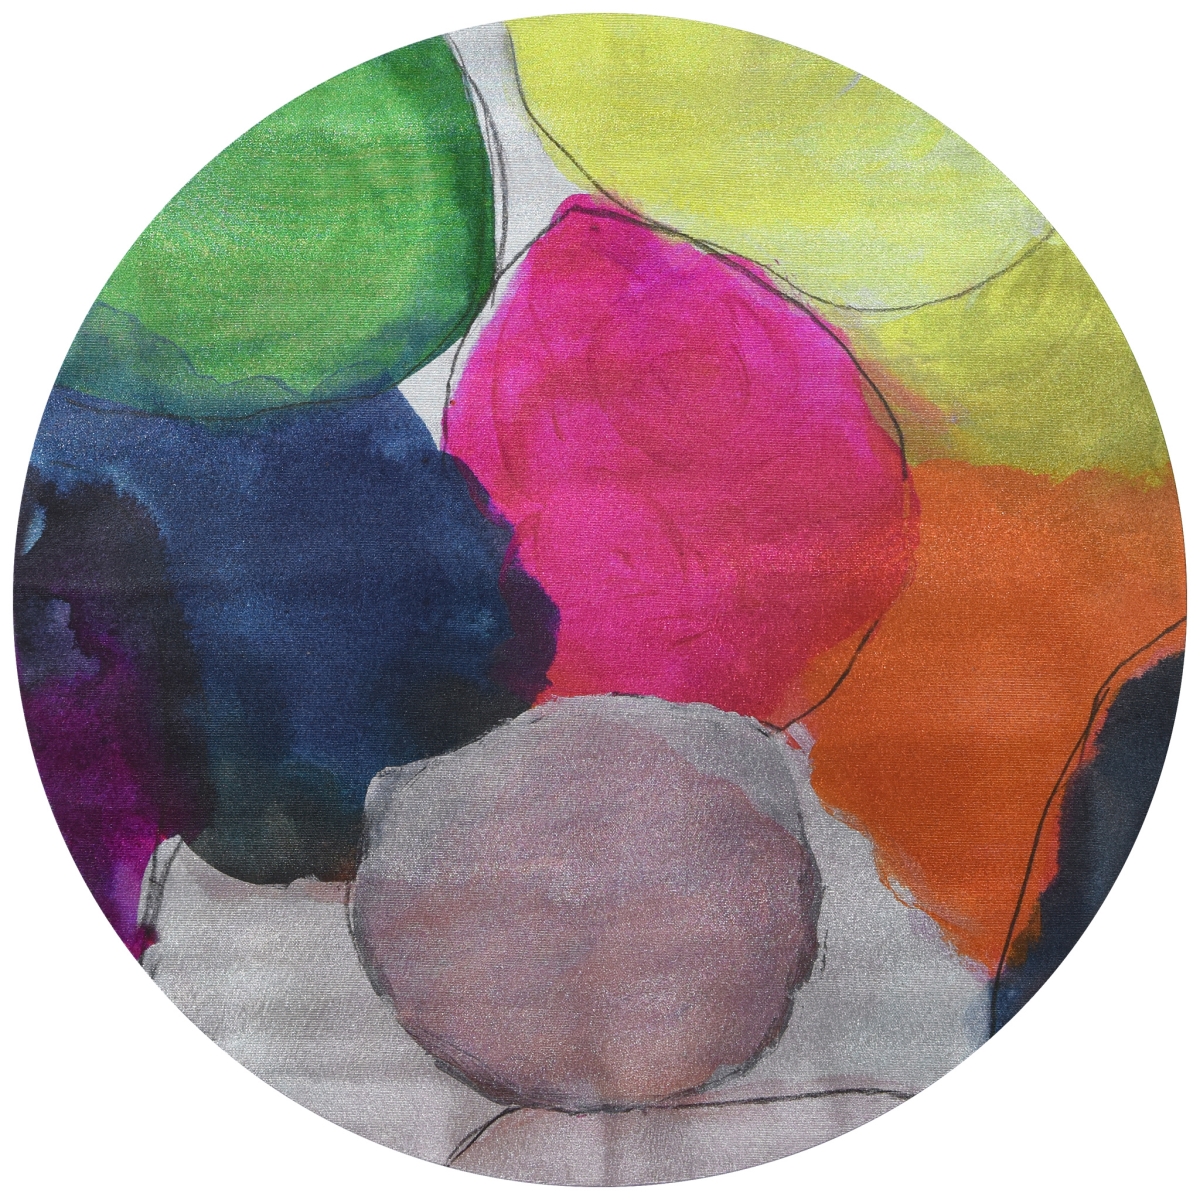 Scgr-78454-24 24 In. Abstract Circular Silver Canvas Giclee Printed Colorful Wall Art